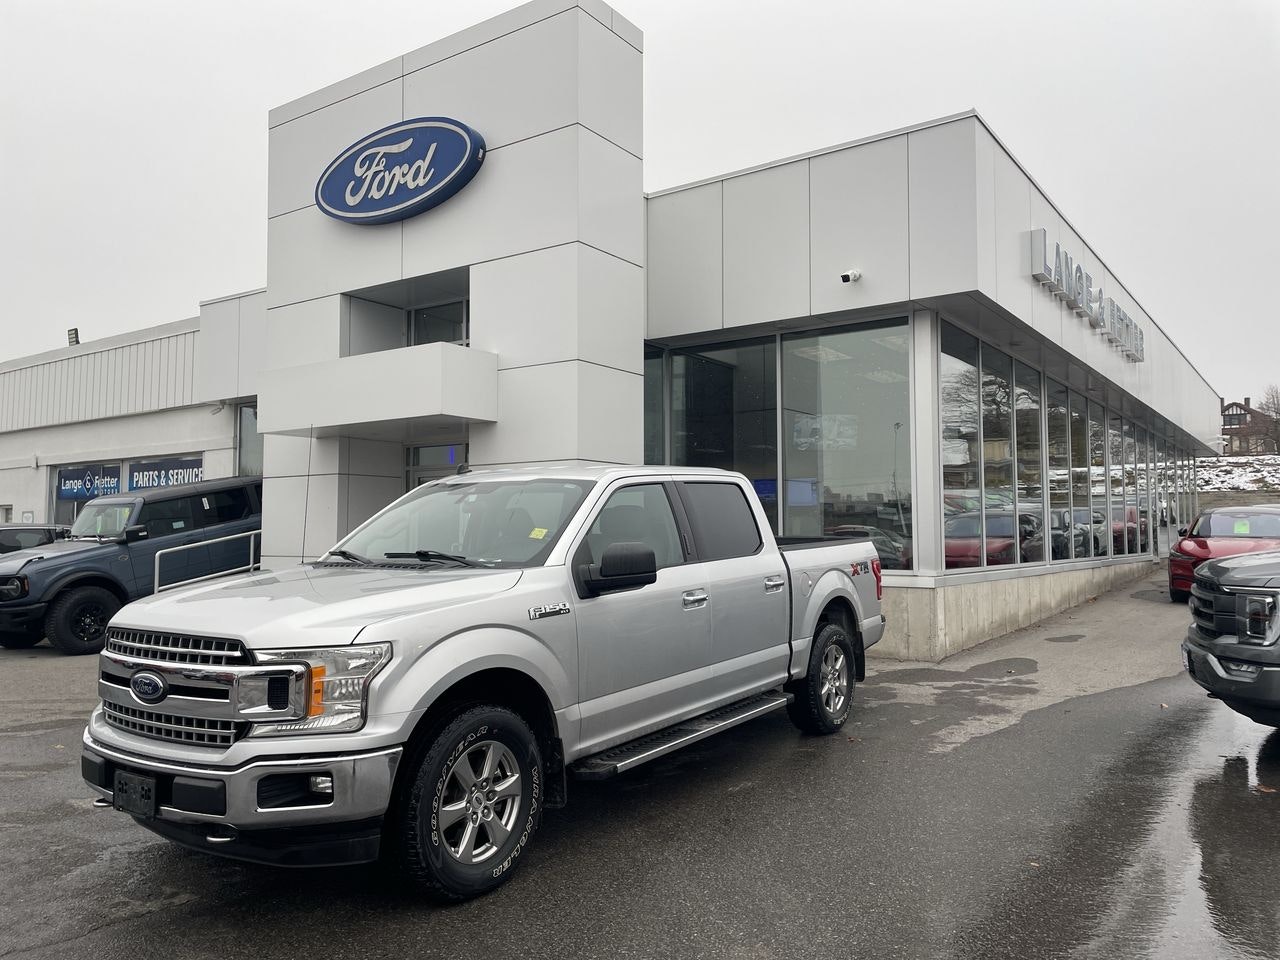 2019 Ford F-150 - 21523A Full Image 1